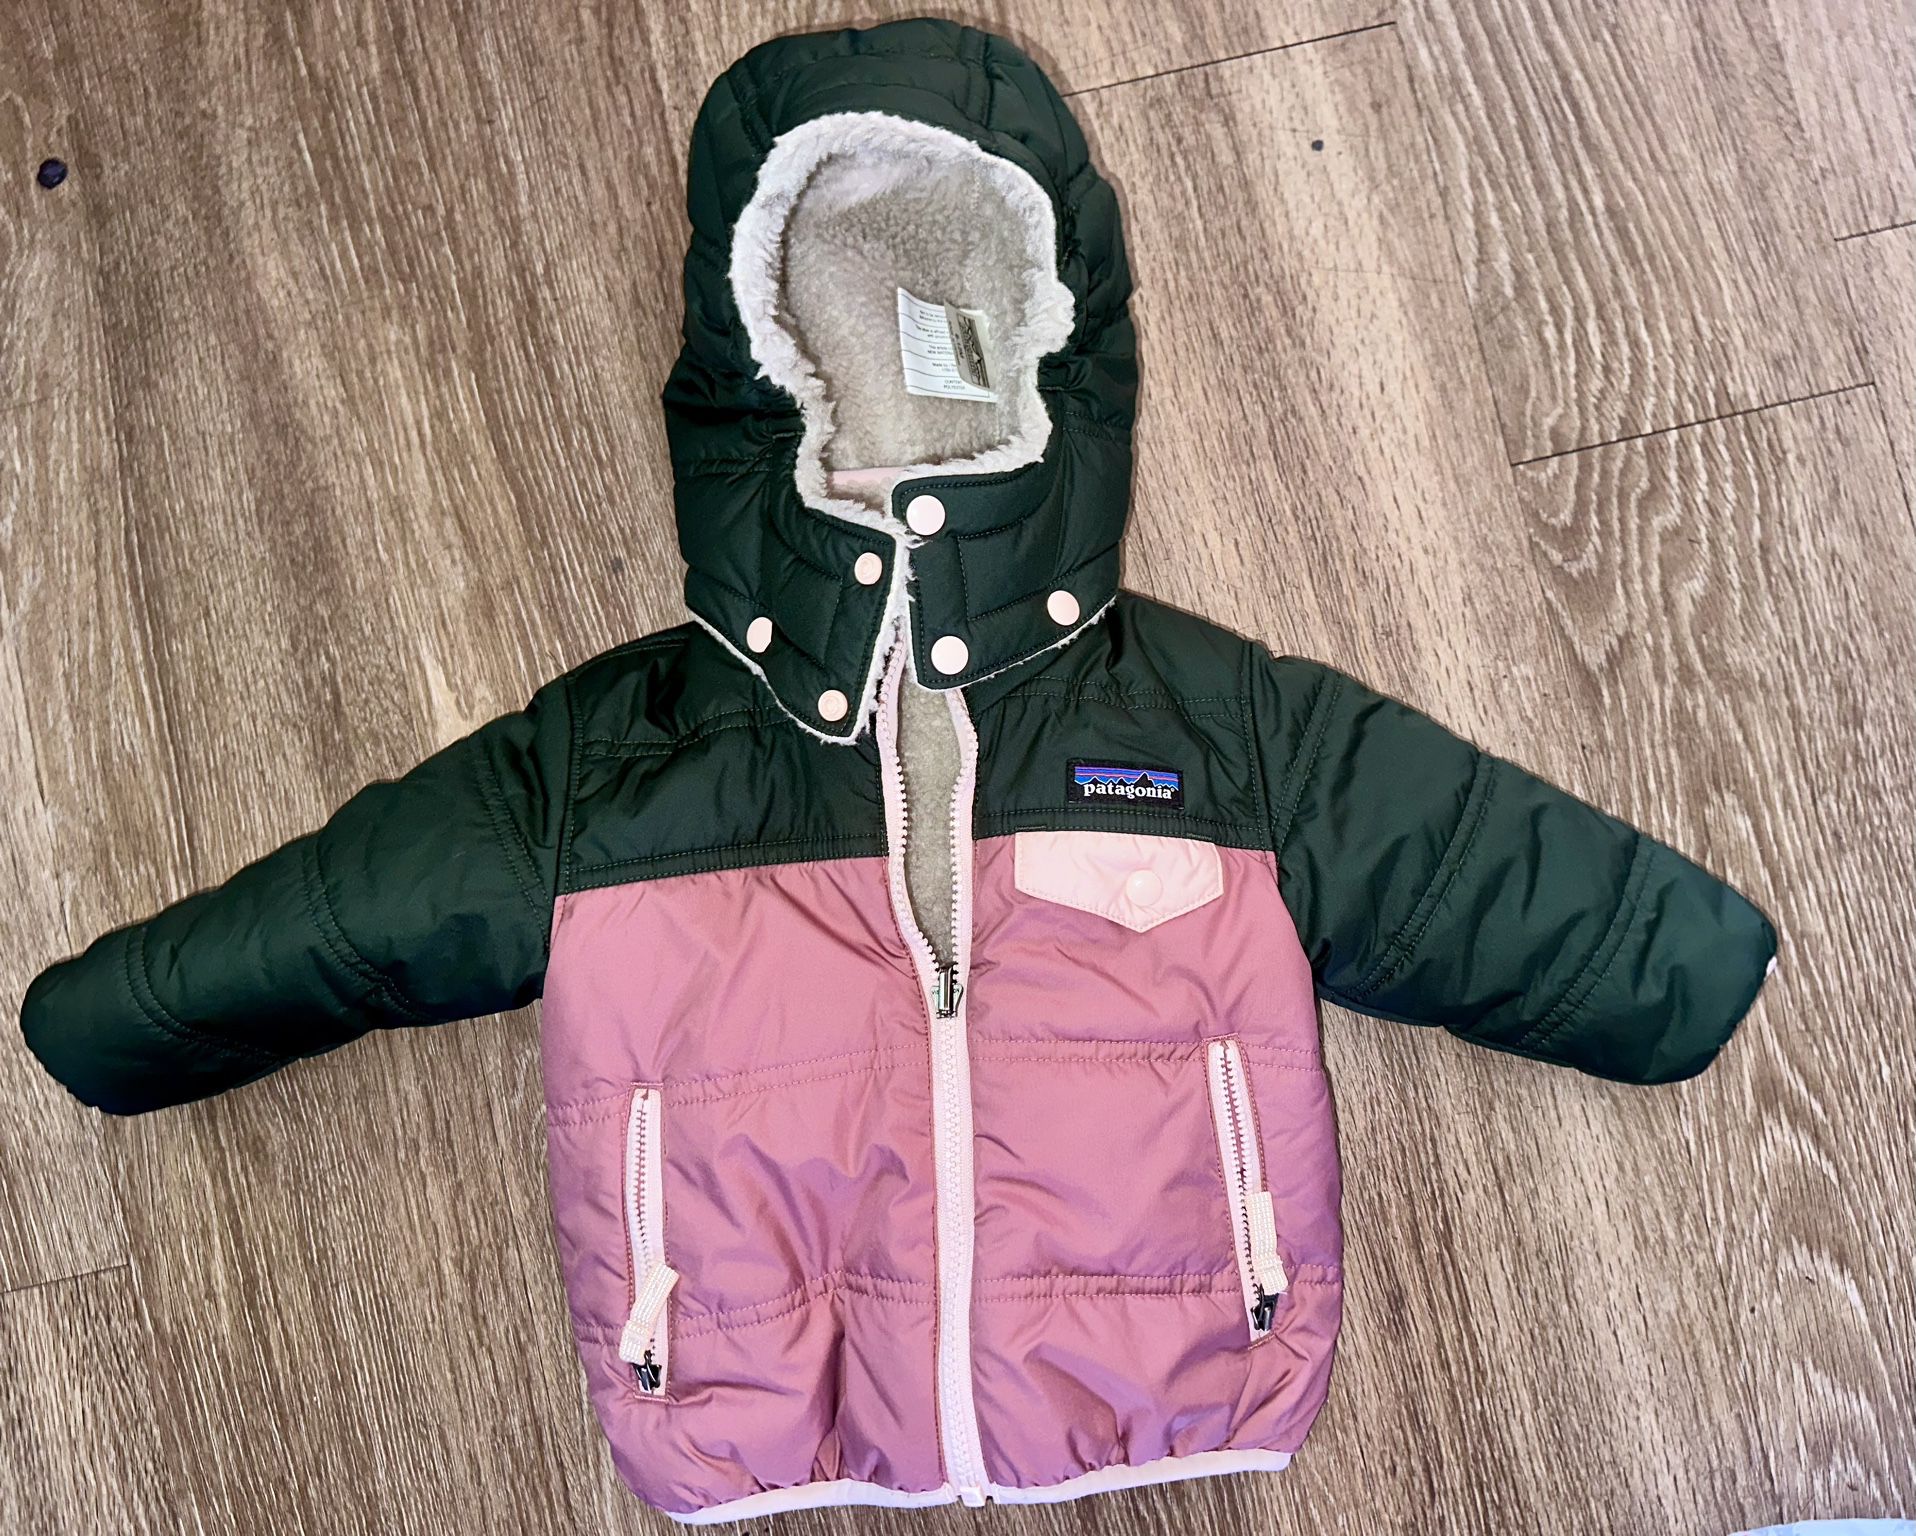 Patagonia Reversible Jacket Excellent Condition